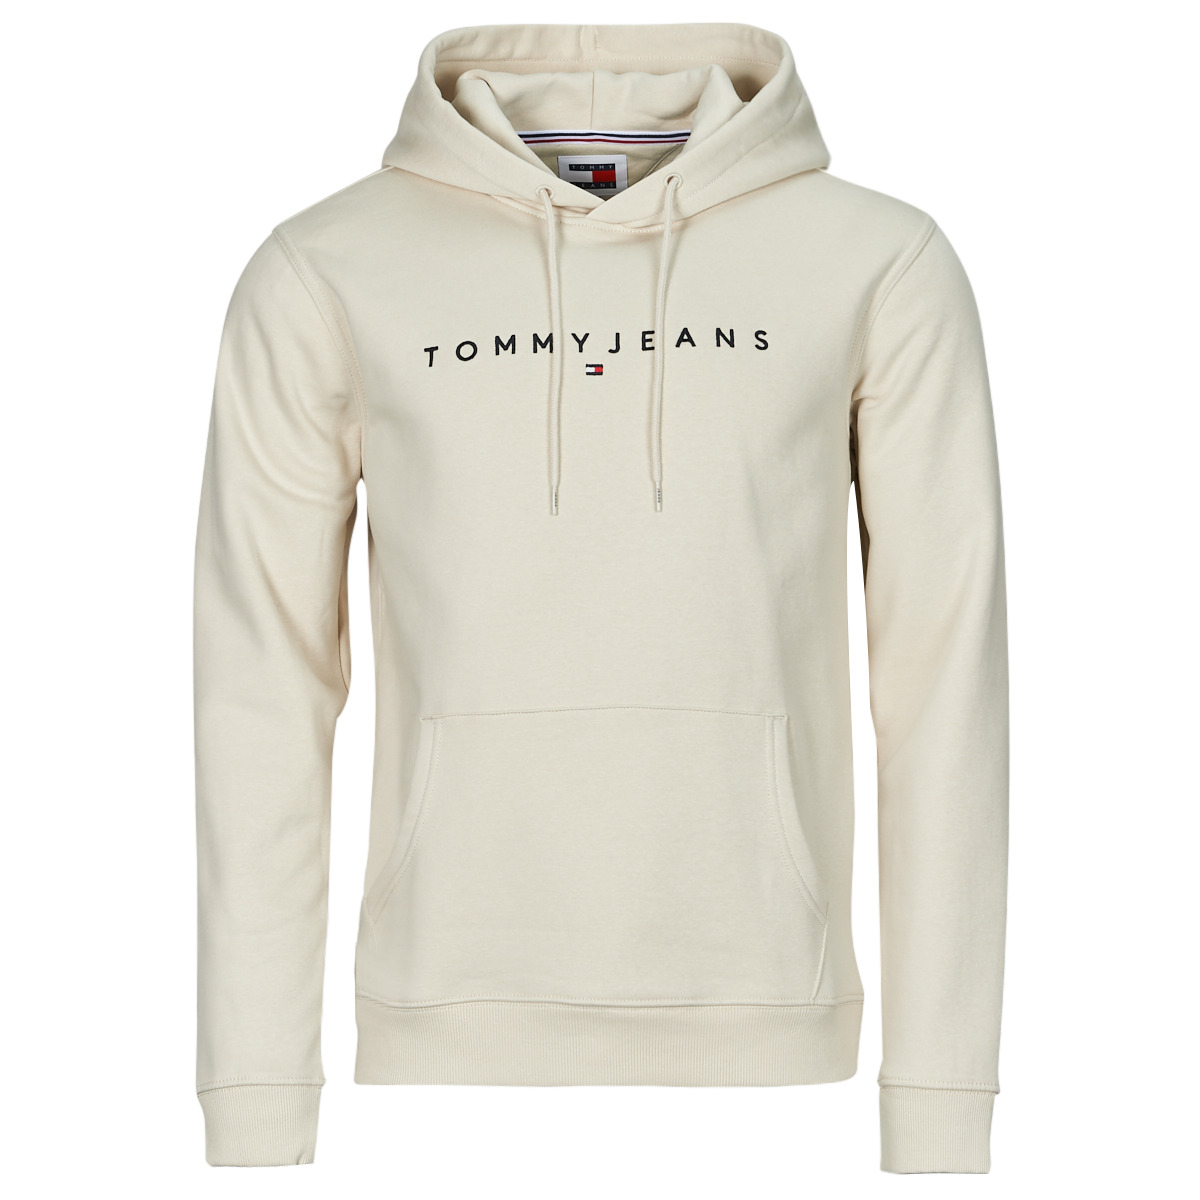 Tommy Jeans TJM REG Men - - LOGO Free delivery Clothing LINEAR Beige ! Spartoo | HOODIE sweaters EXT NET